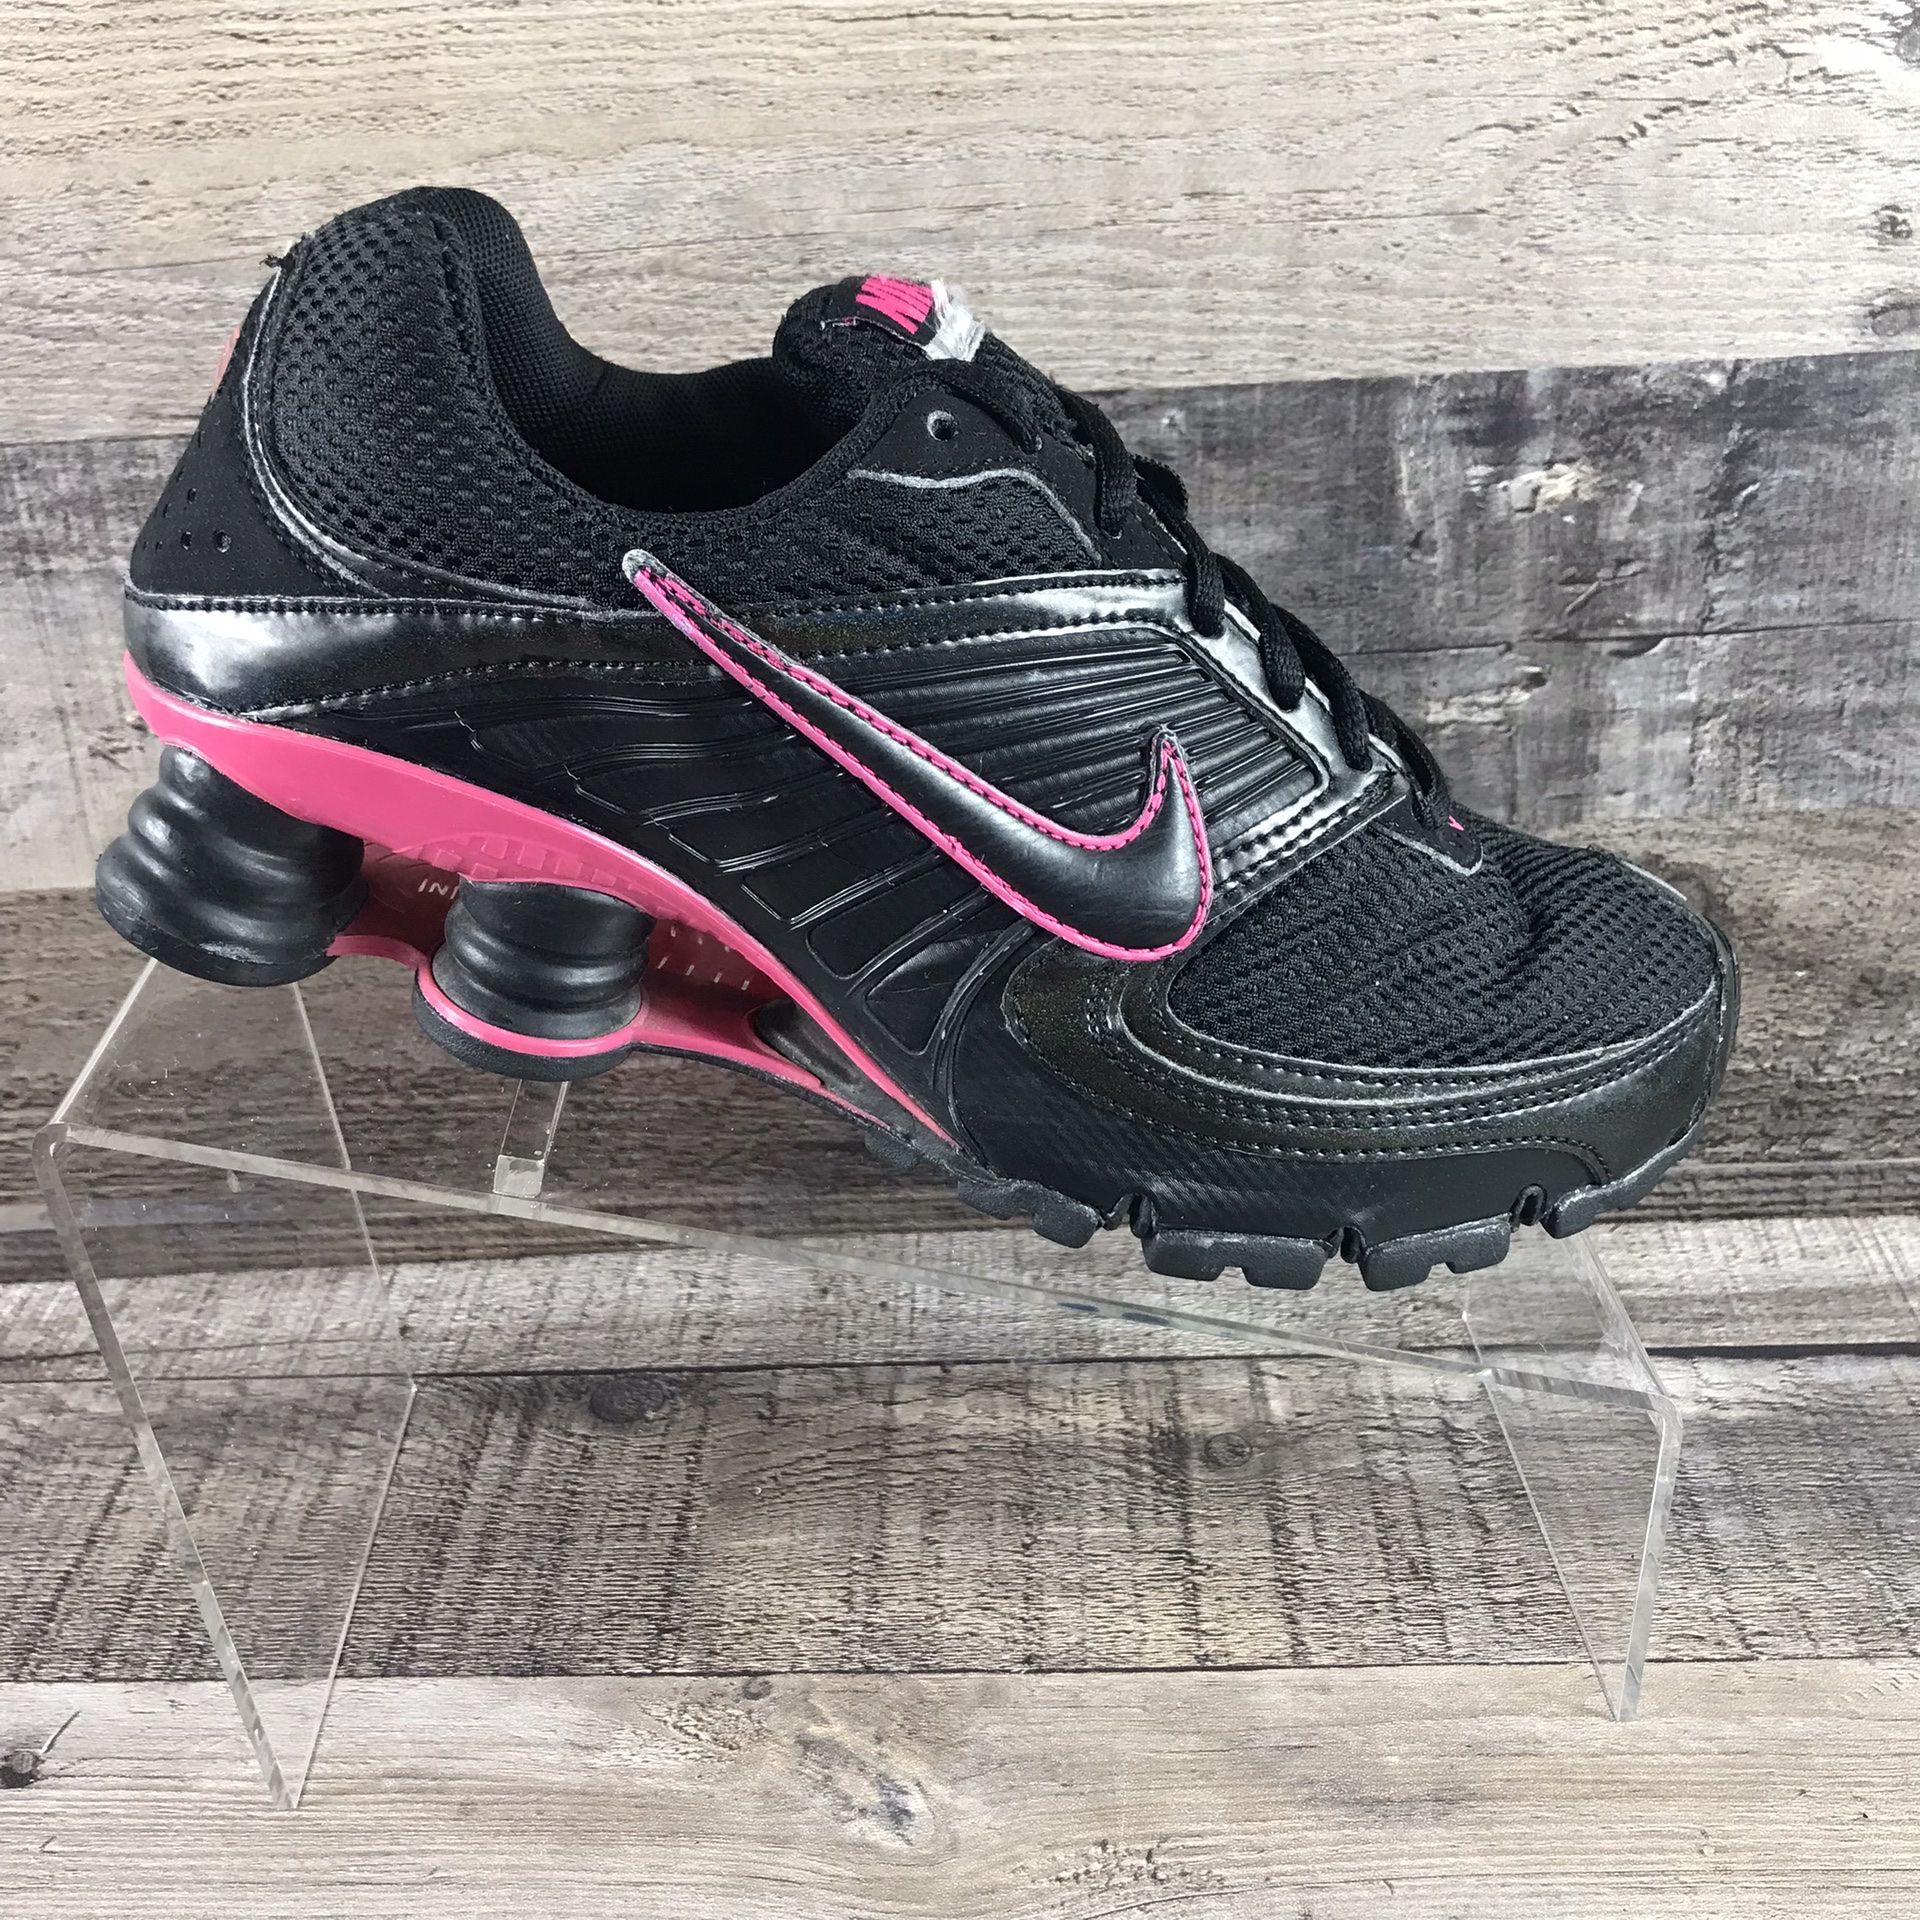 Nike Turbo 8 Wm's Black Pink Training Size 6.5 for Sale in Irving, TX -